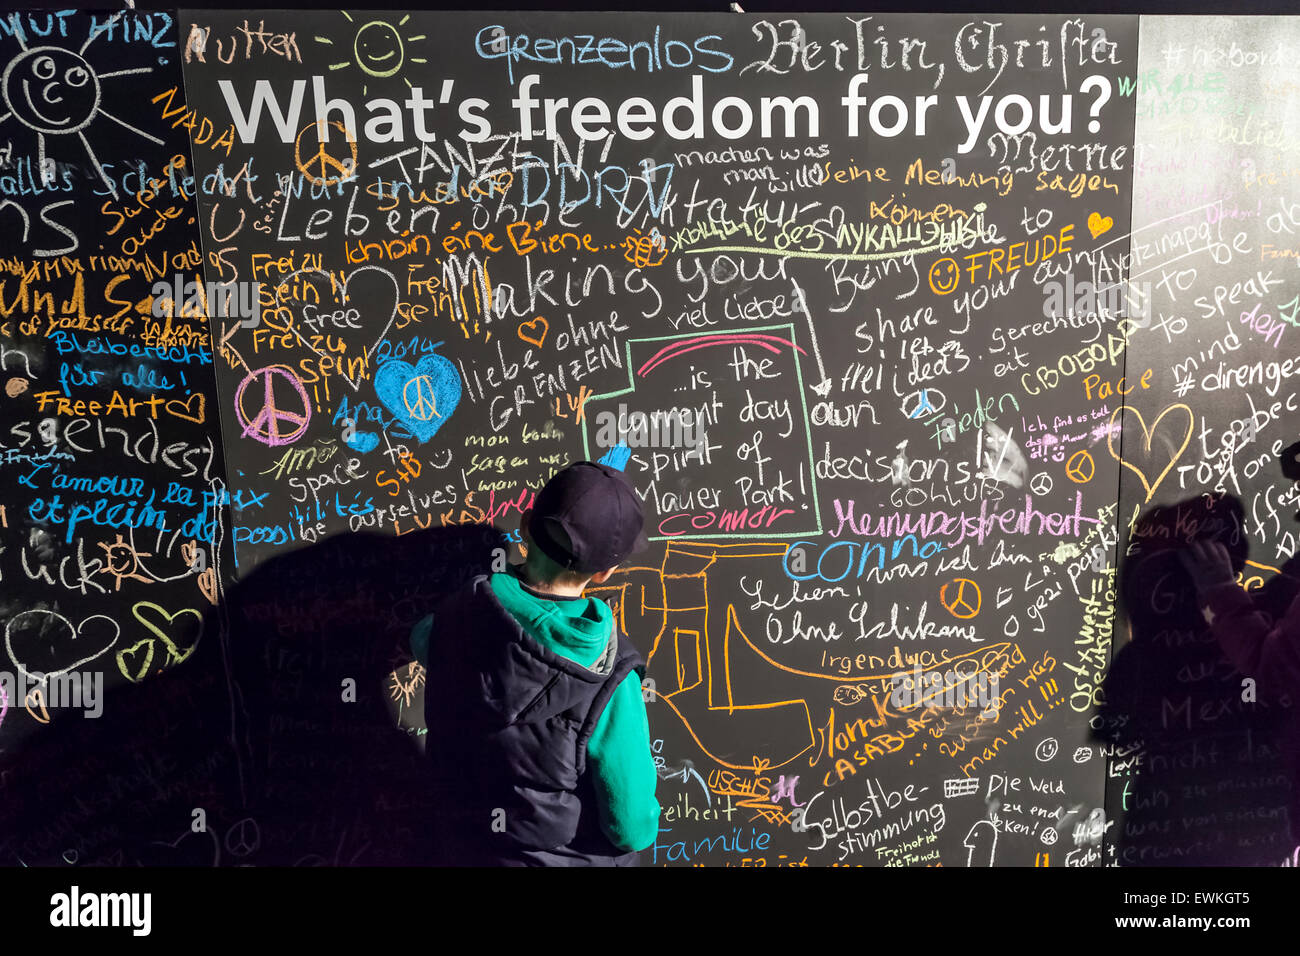 Children write on a chalk board celebrating 25 years since the fall of the Berlin Wall at Mauerpark, Berlin, Germany. Stock Photo